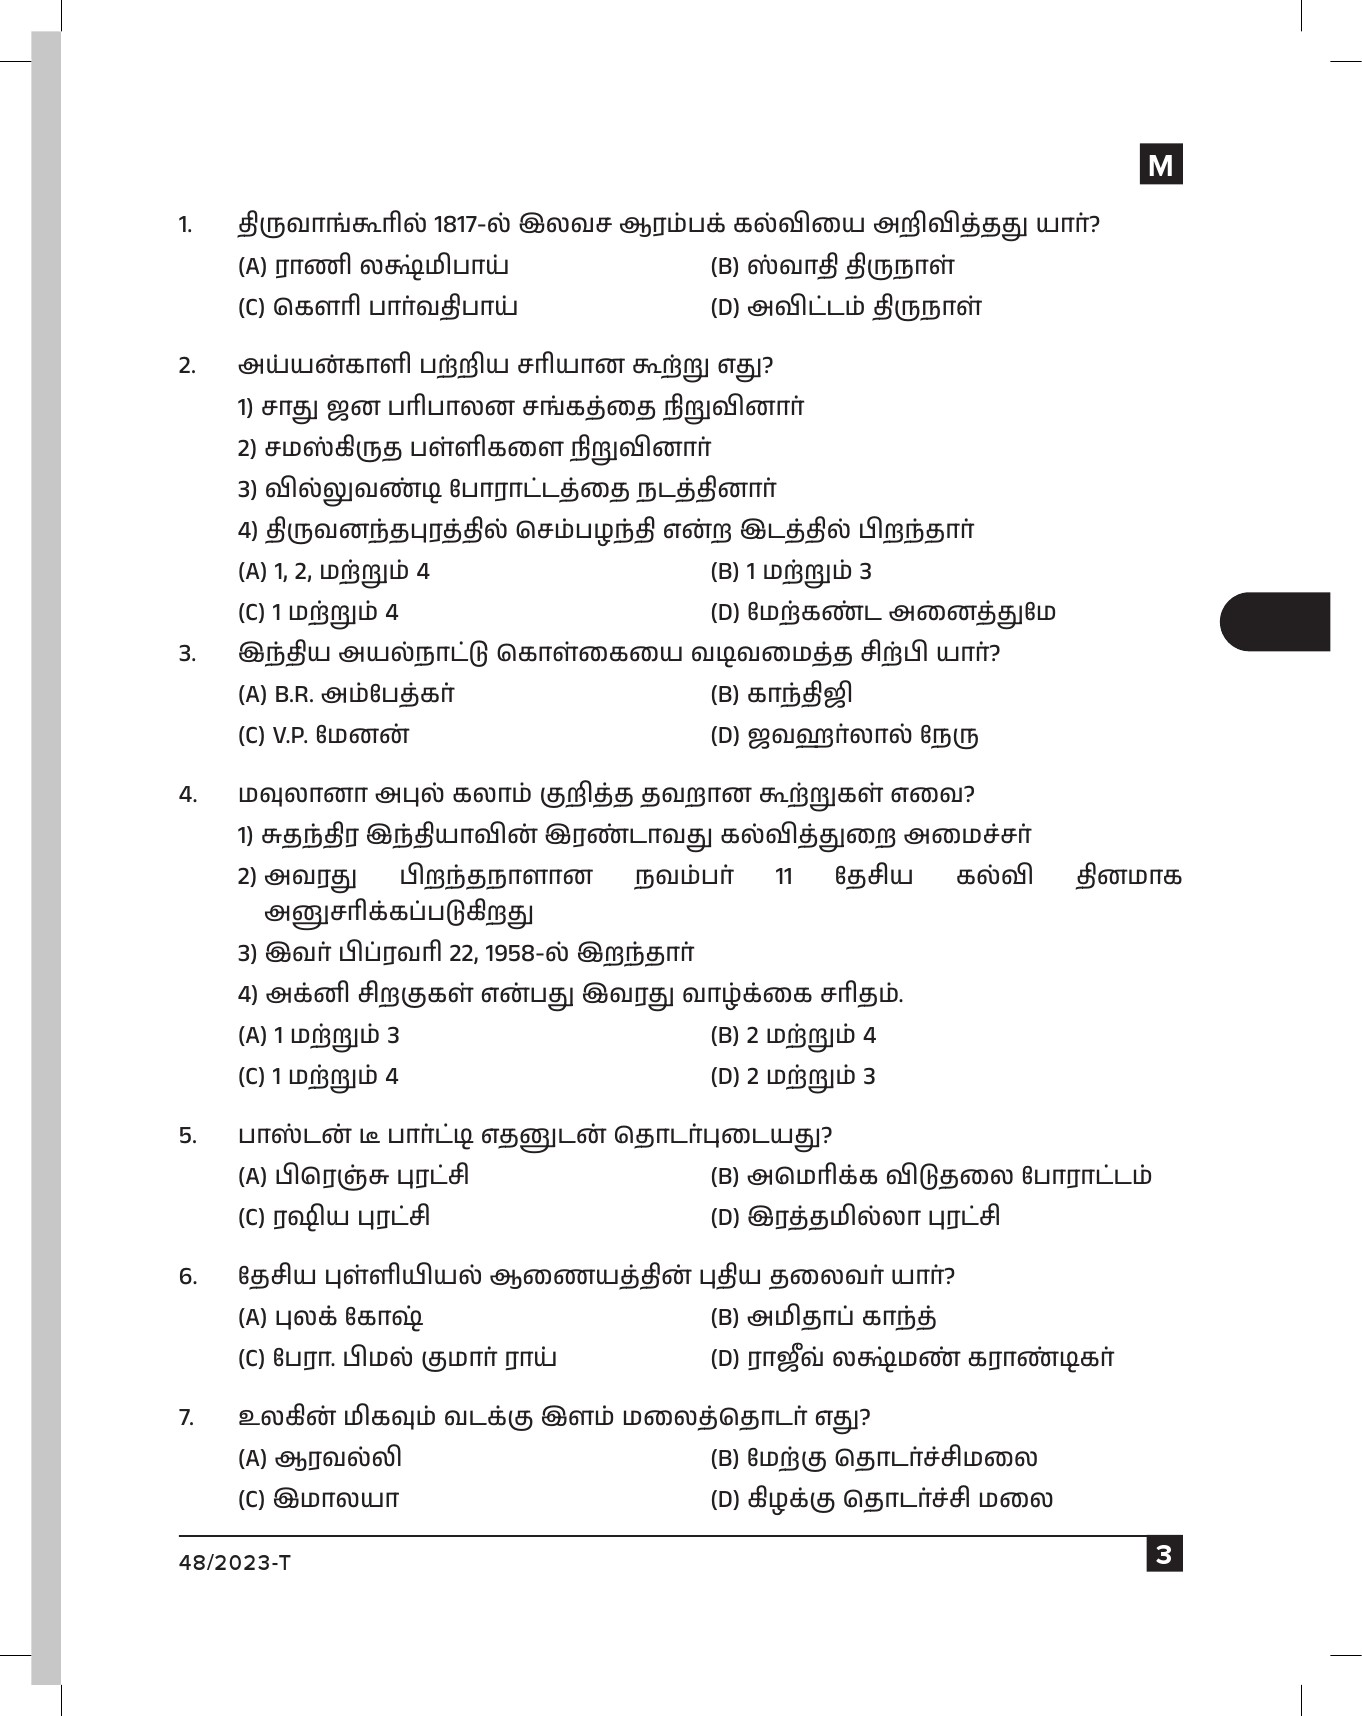 KPSC Fire and Rescue Officer Tamil Exam 2023 Code 0482023 T 2